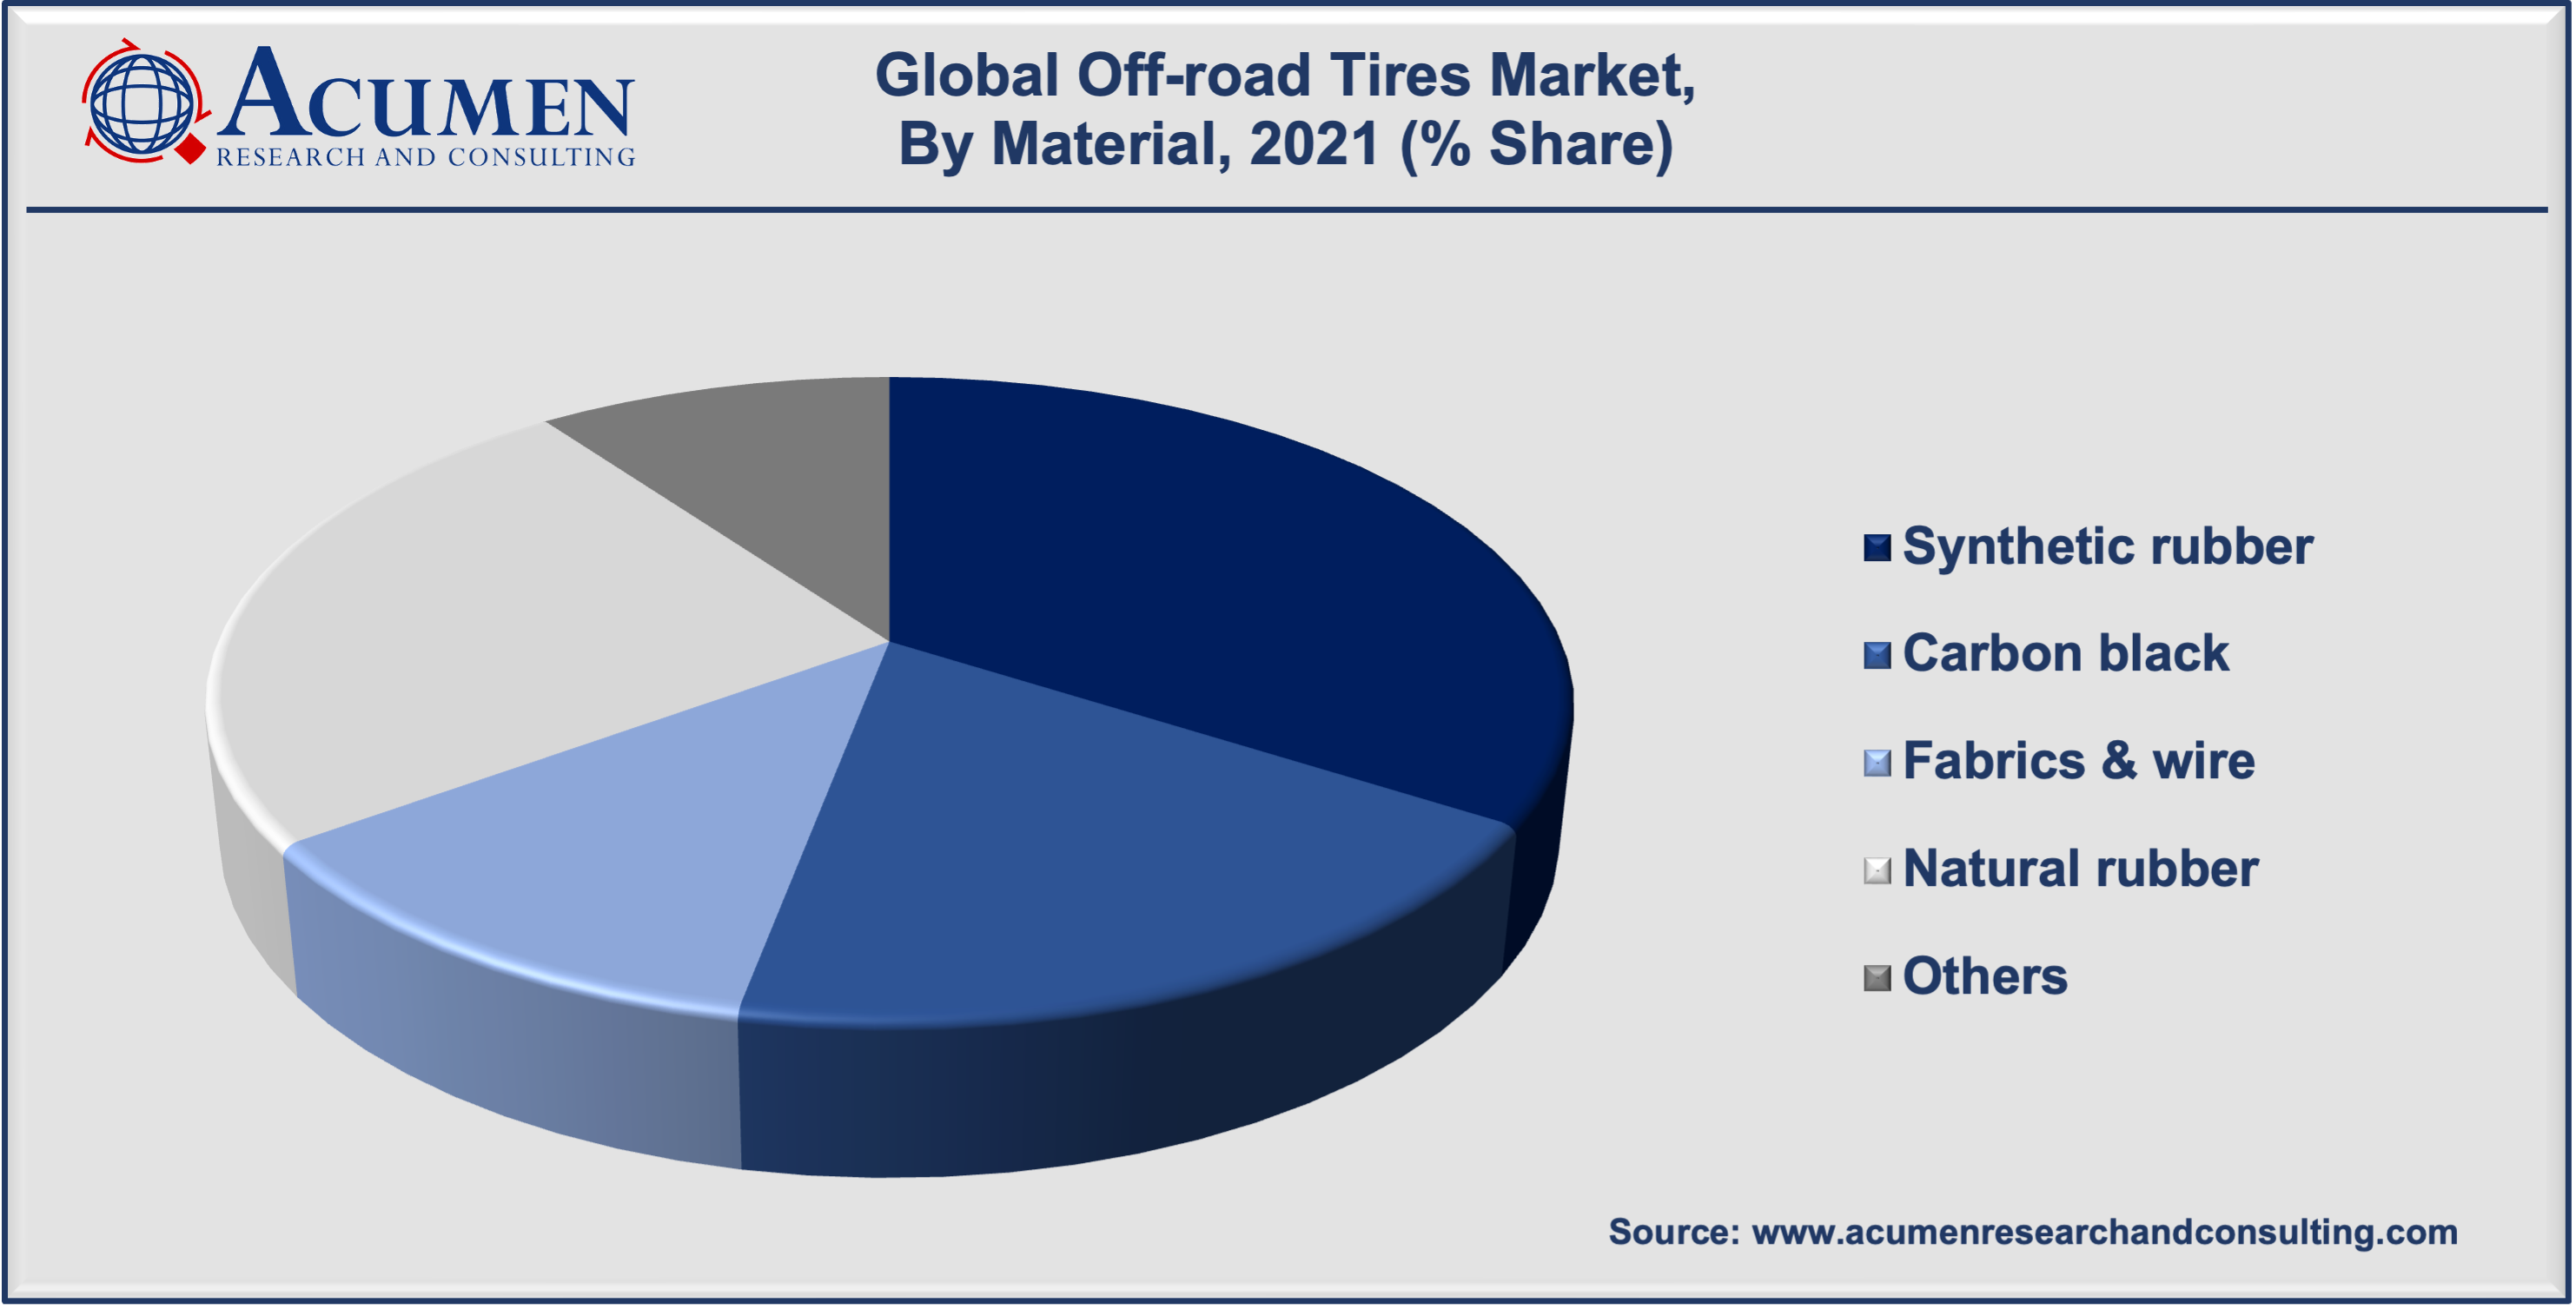 Off-road Tires Market By Material is expected to reach the value of USD 849.3 Billion by 2030, growing at a CAGR of 7.3%